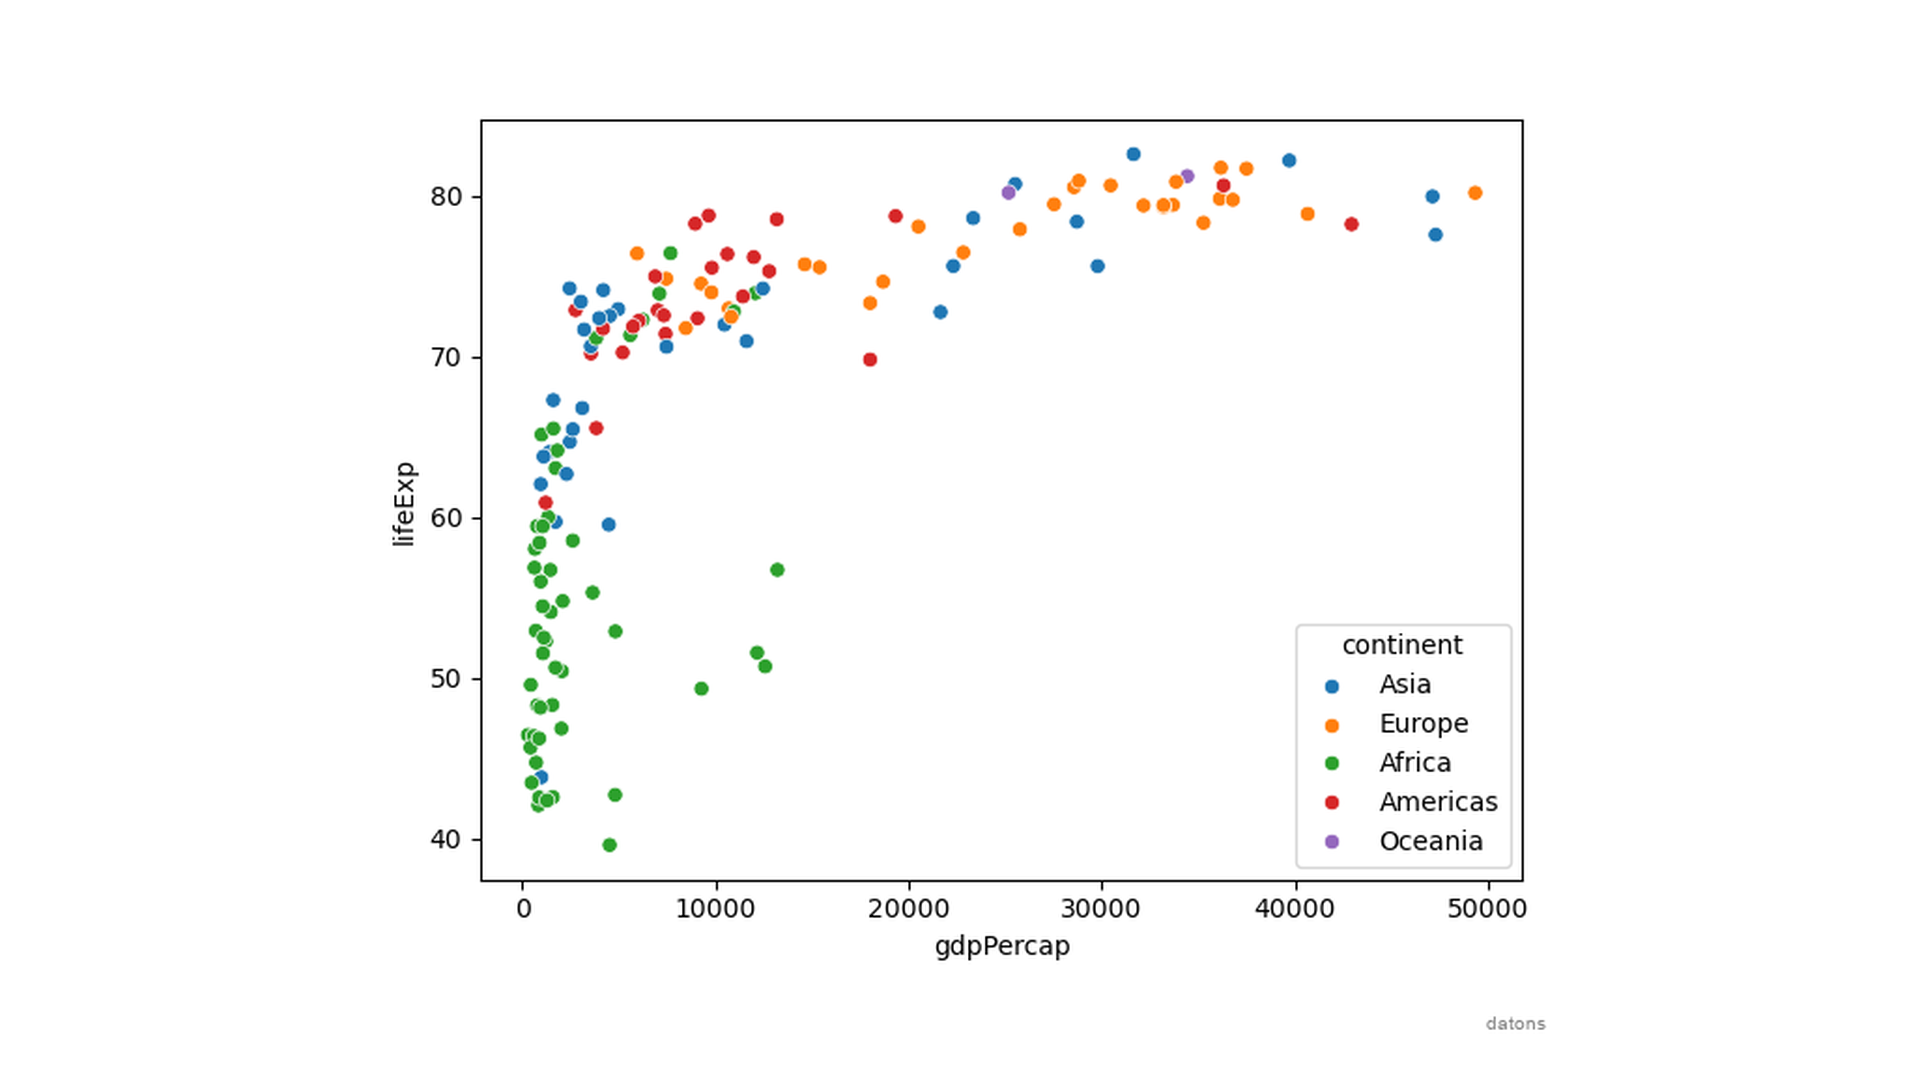 Color-coded scatter plot by continent using Seaborn's hue parameter